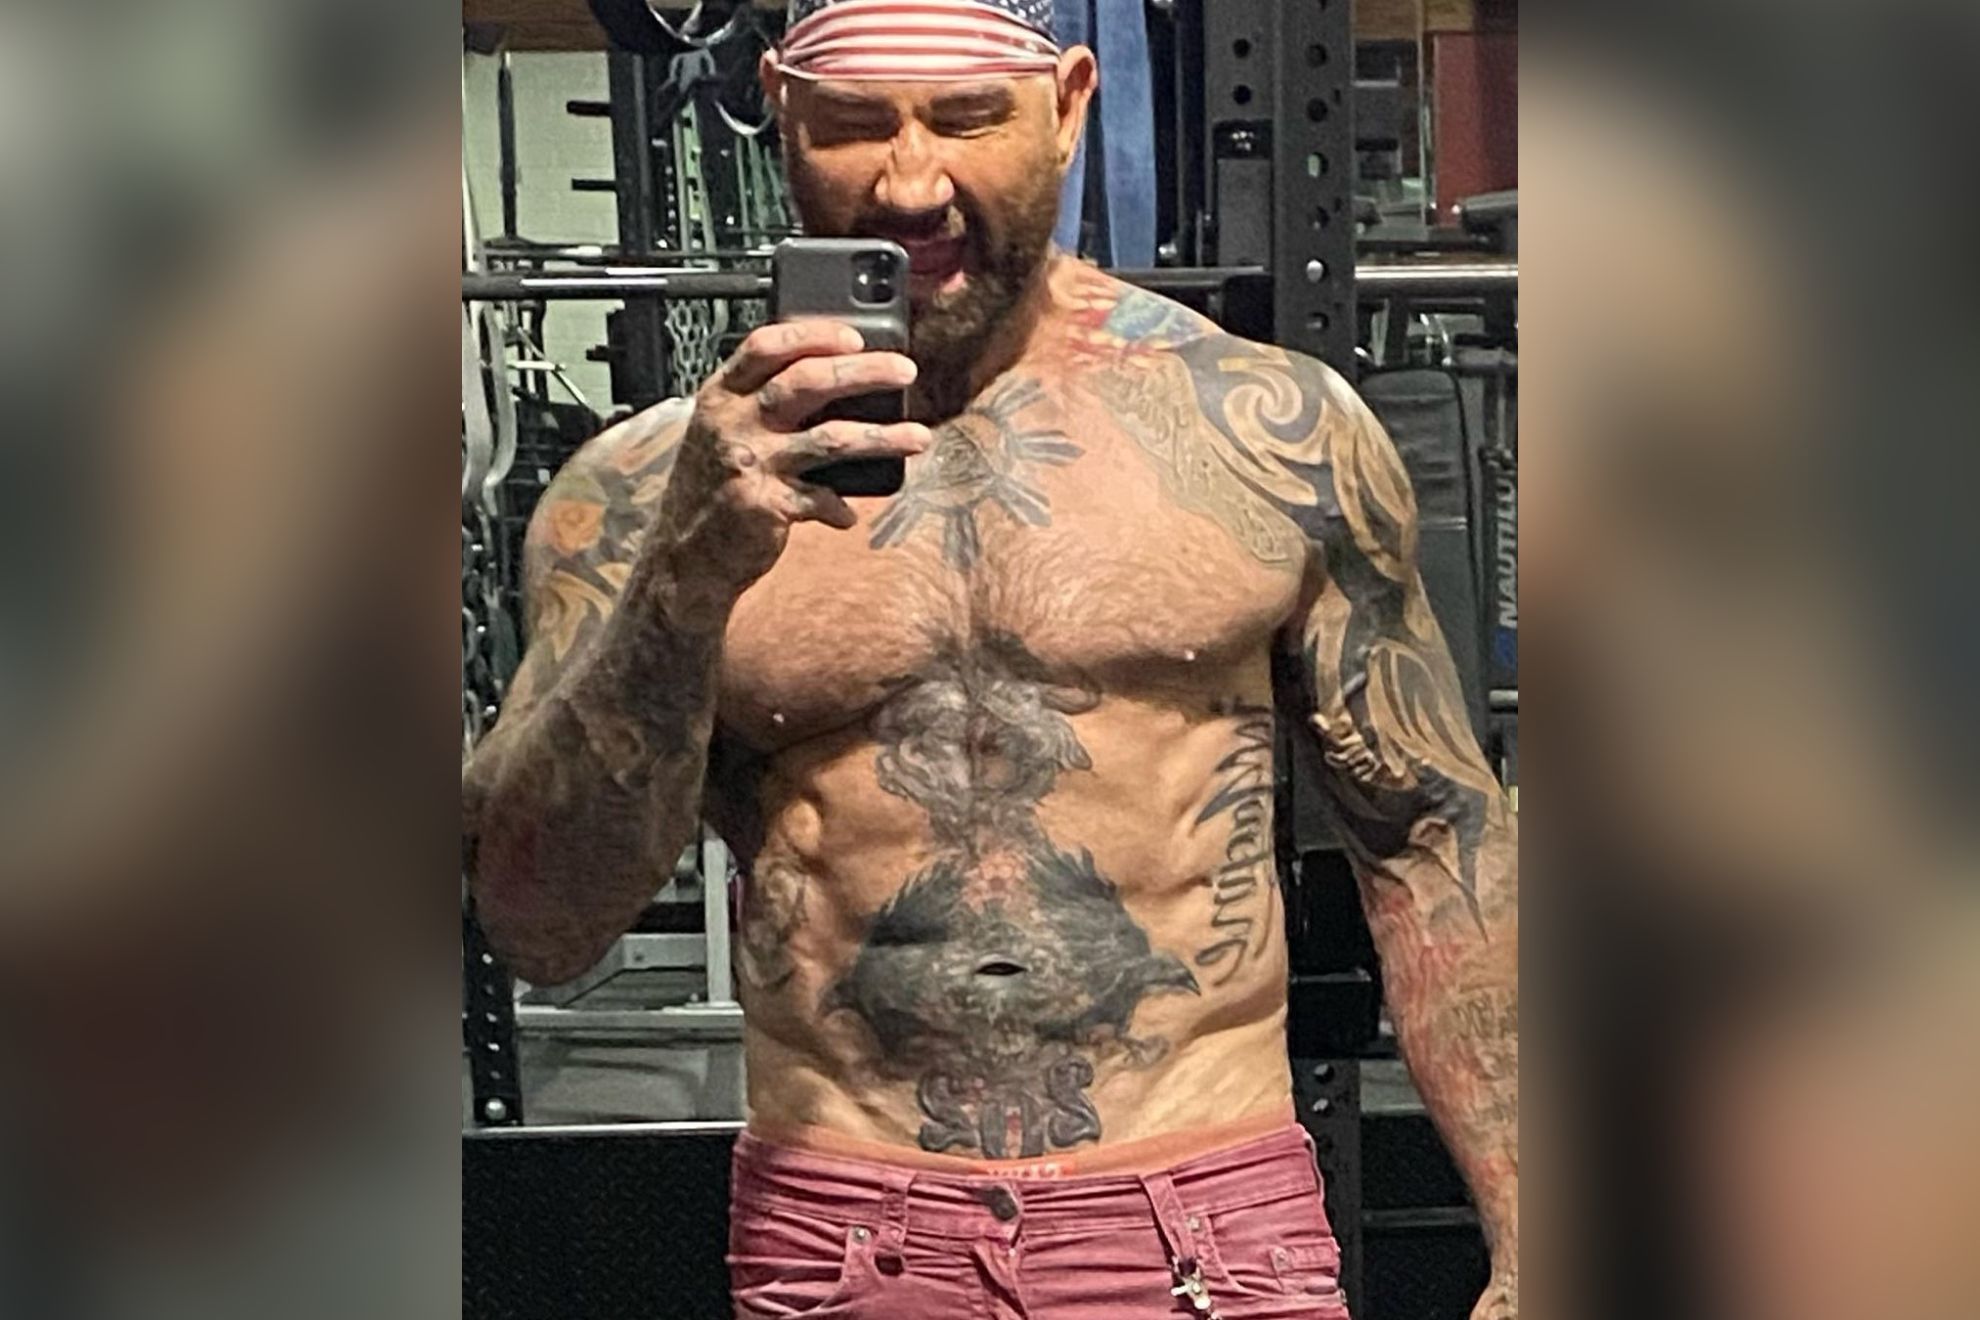 How Tall is Dave Bautista? 